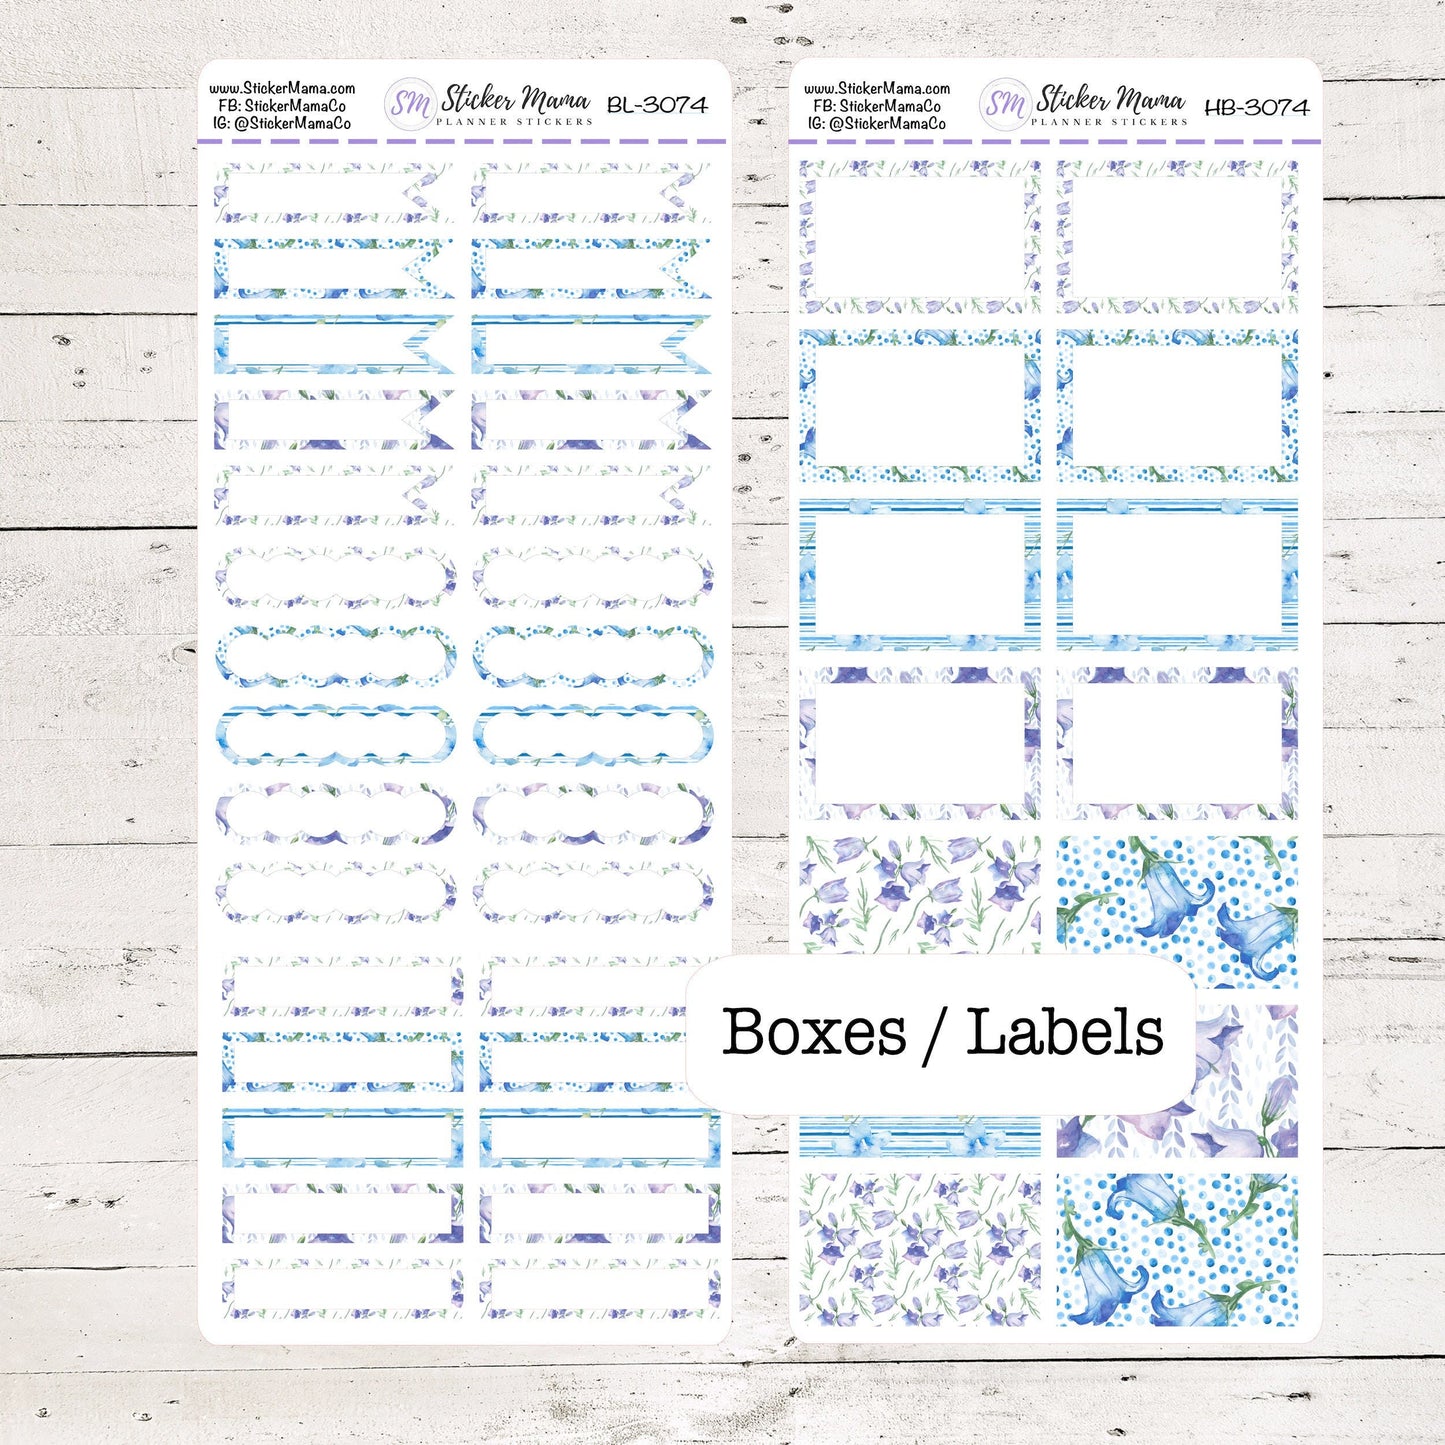 BL-3074 - HB-3074 BASIC Label Stickers - Bellflowers - Half Boxes - Planner Stickers - Full Box for Planners